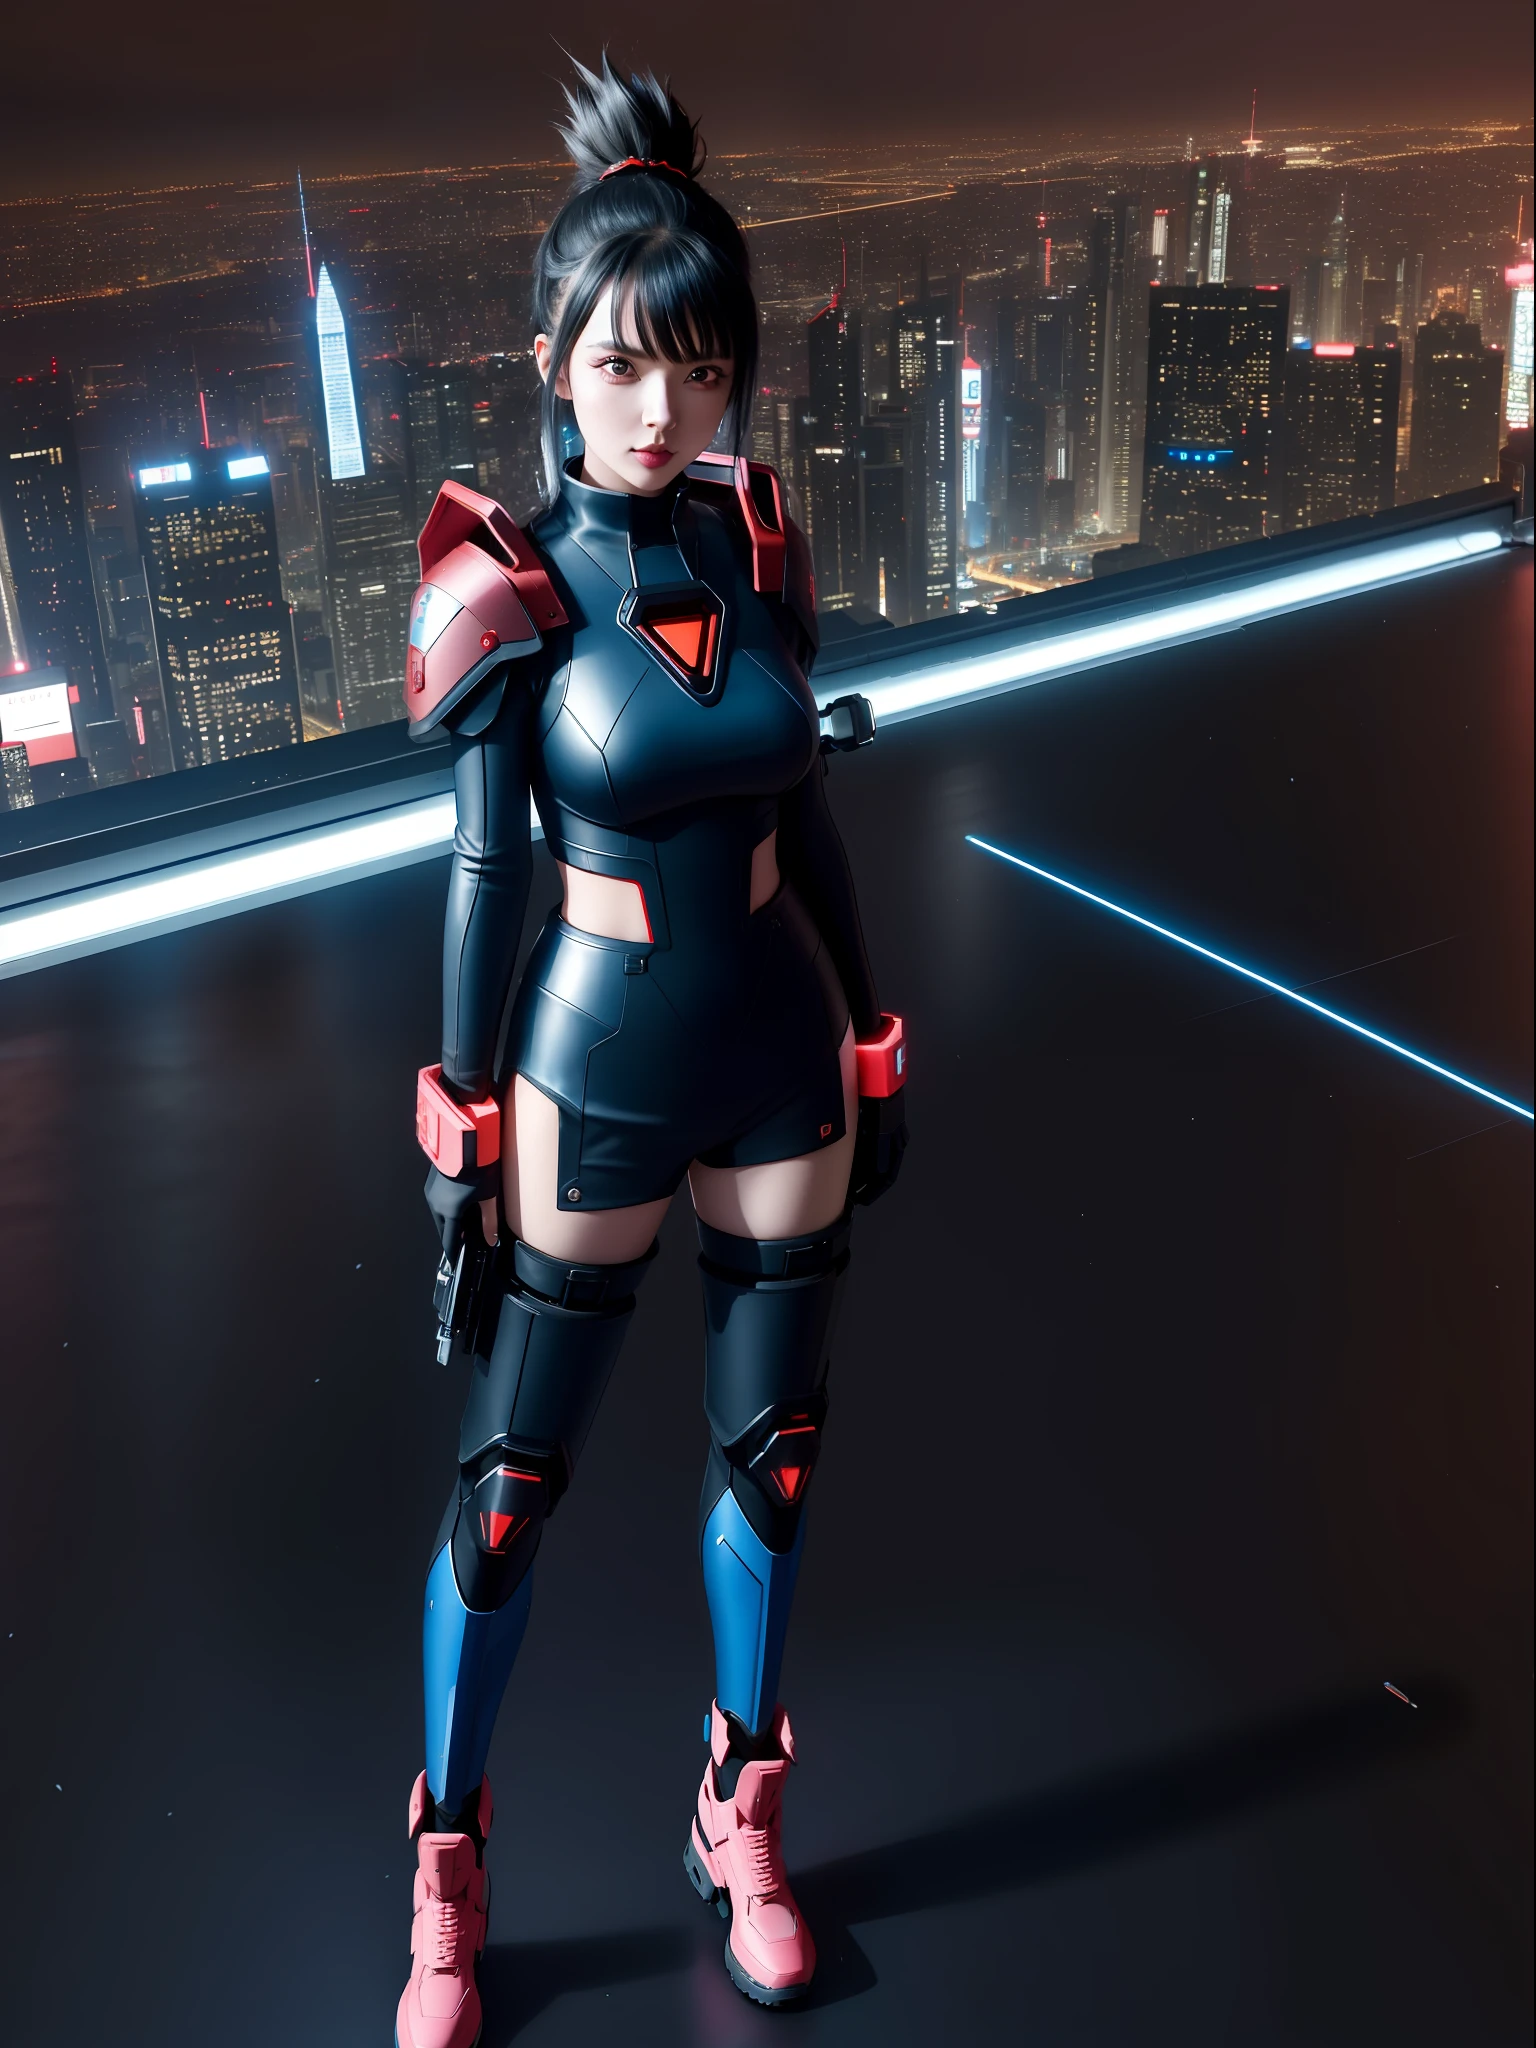 (full body photo:1.9), (A Kawaii Woman:1.5), (wearing red metal cyberpunk outfit|black|futurist blue+with a blue jewel on her breastplate:1.4), (she's in a futuristic city with lots of flying cars+at night+raining hard:1.5), (she has mohawk hair roza:1.3), (she has blue eyes:1.3), (she's holding futuristic weapons+sorting+staring at the viewer:1.5),  Hyperrealism, 16k, best quality, high details, UHD